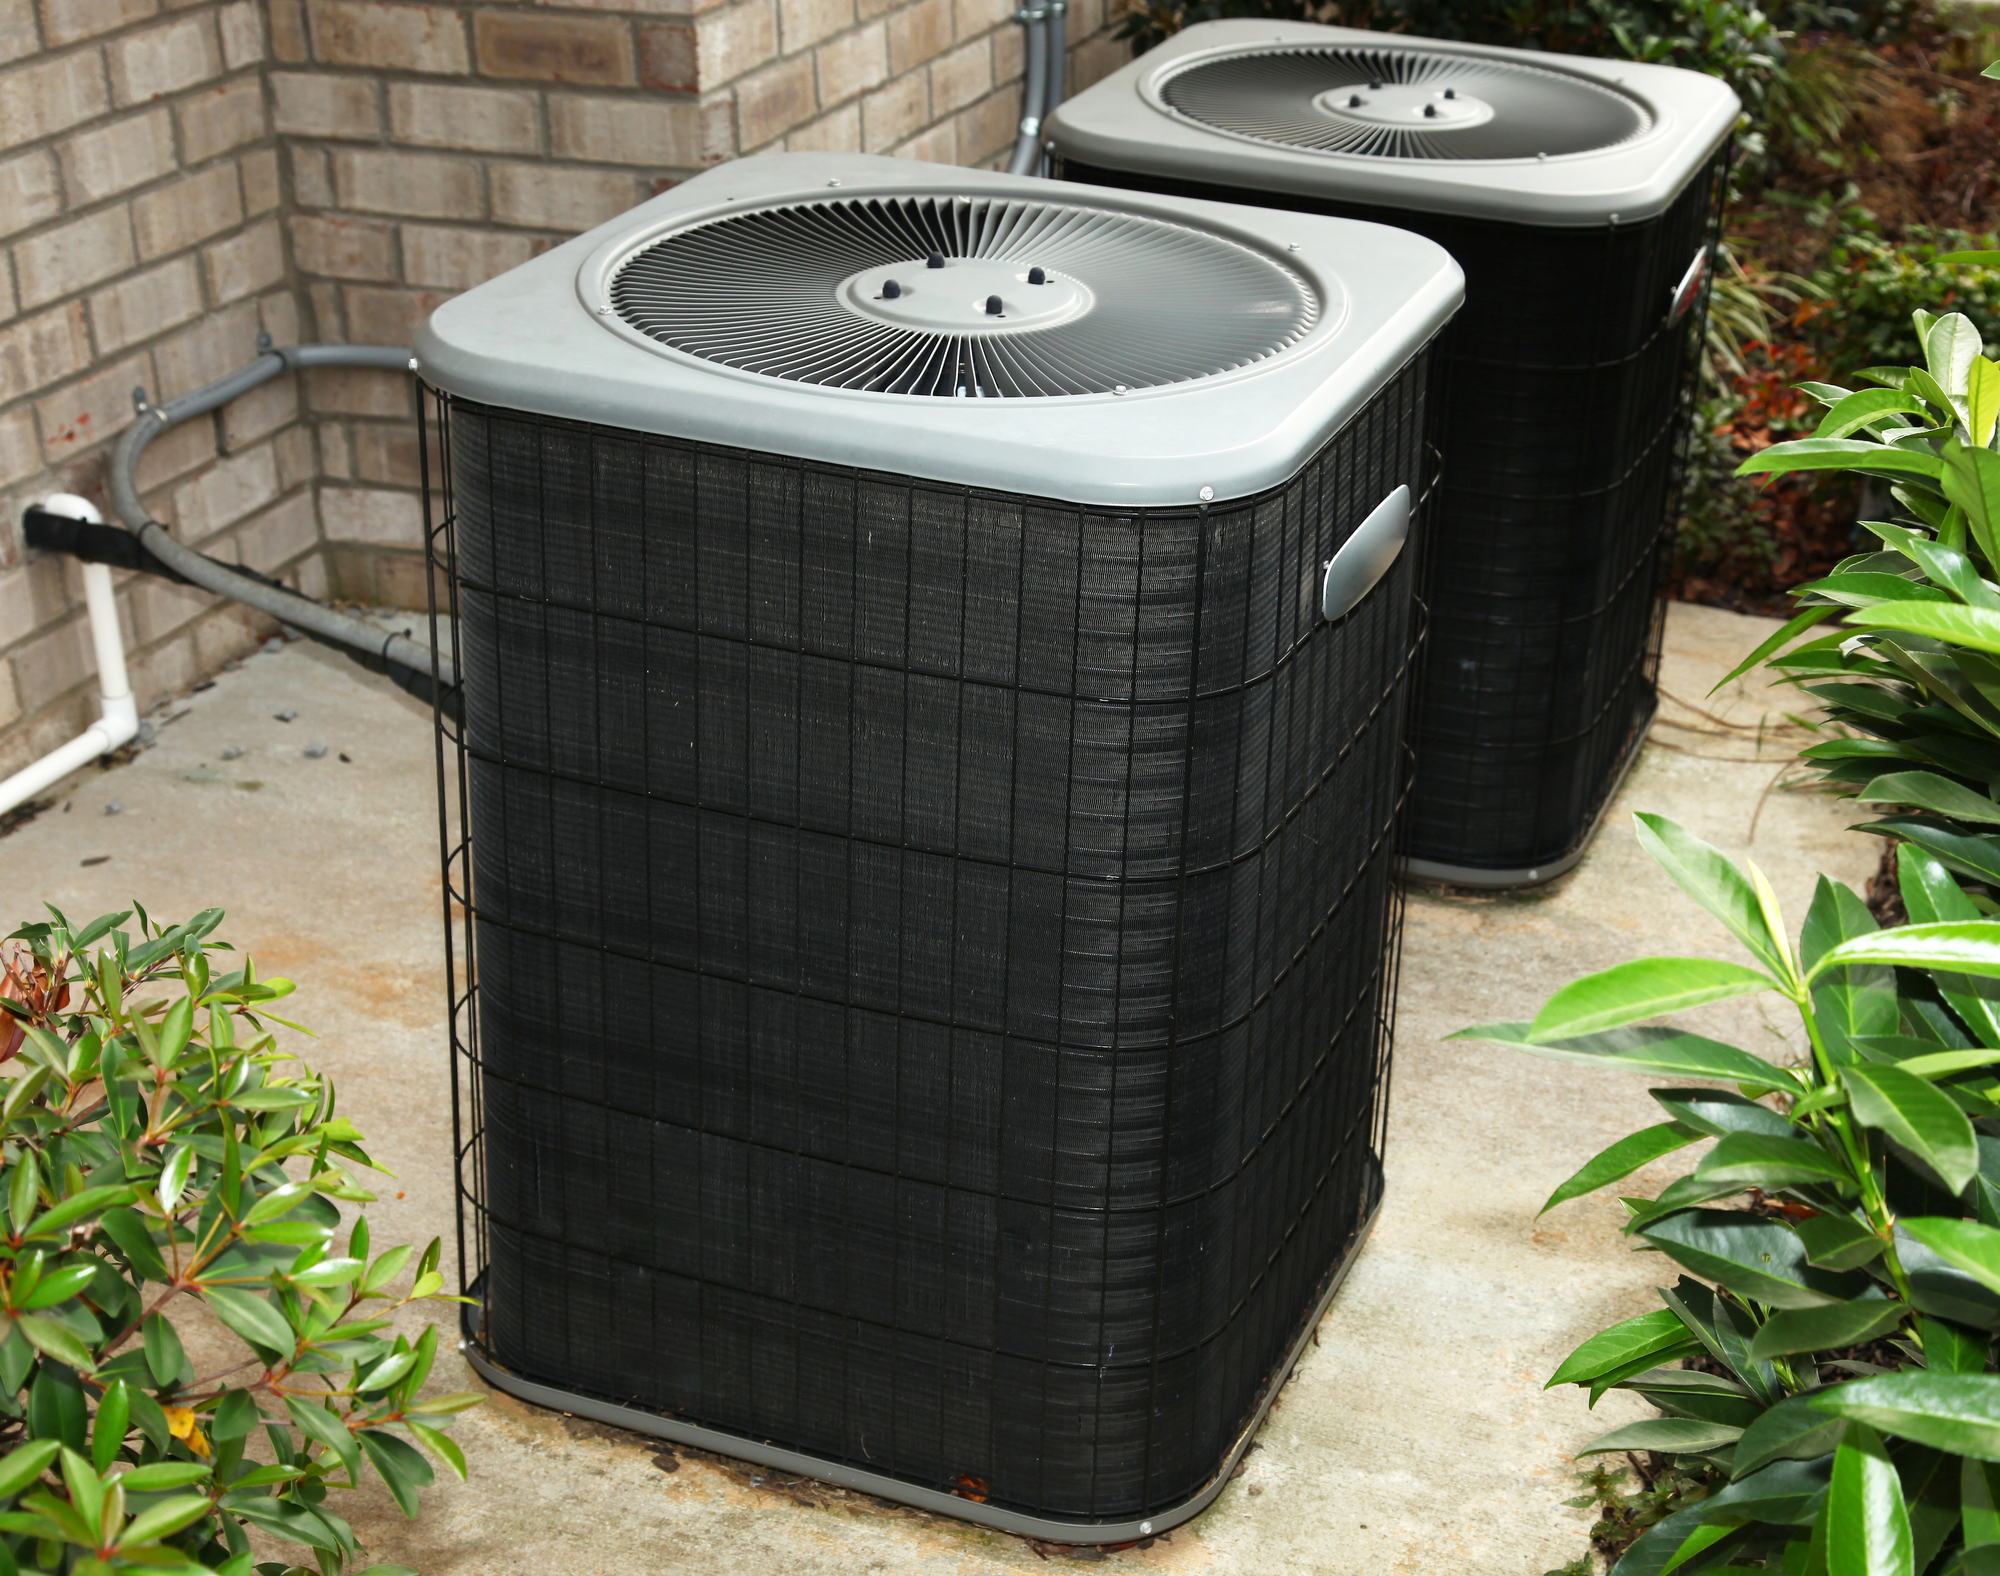 Residential Central Air Conditioning Unit on cement slab